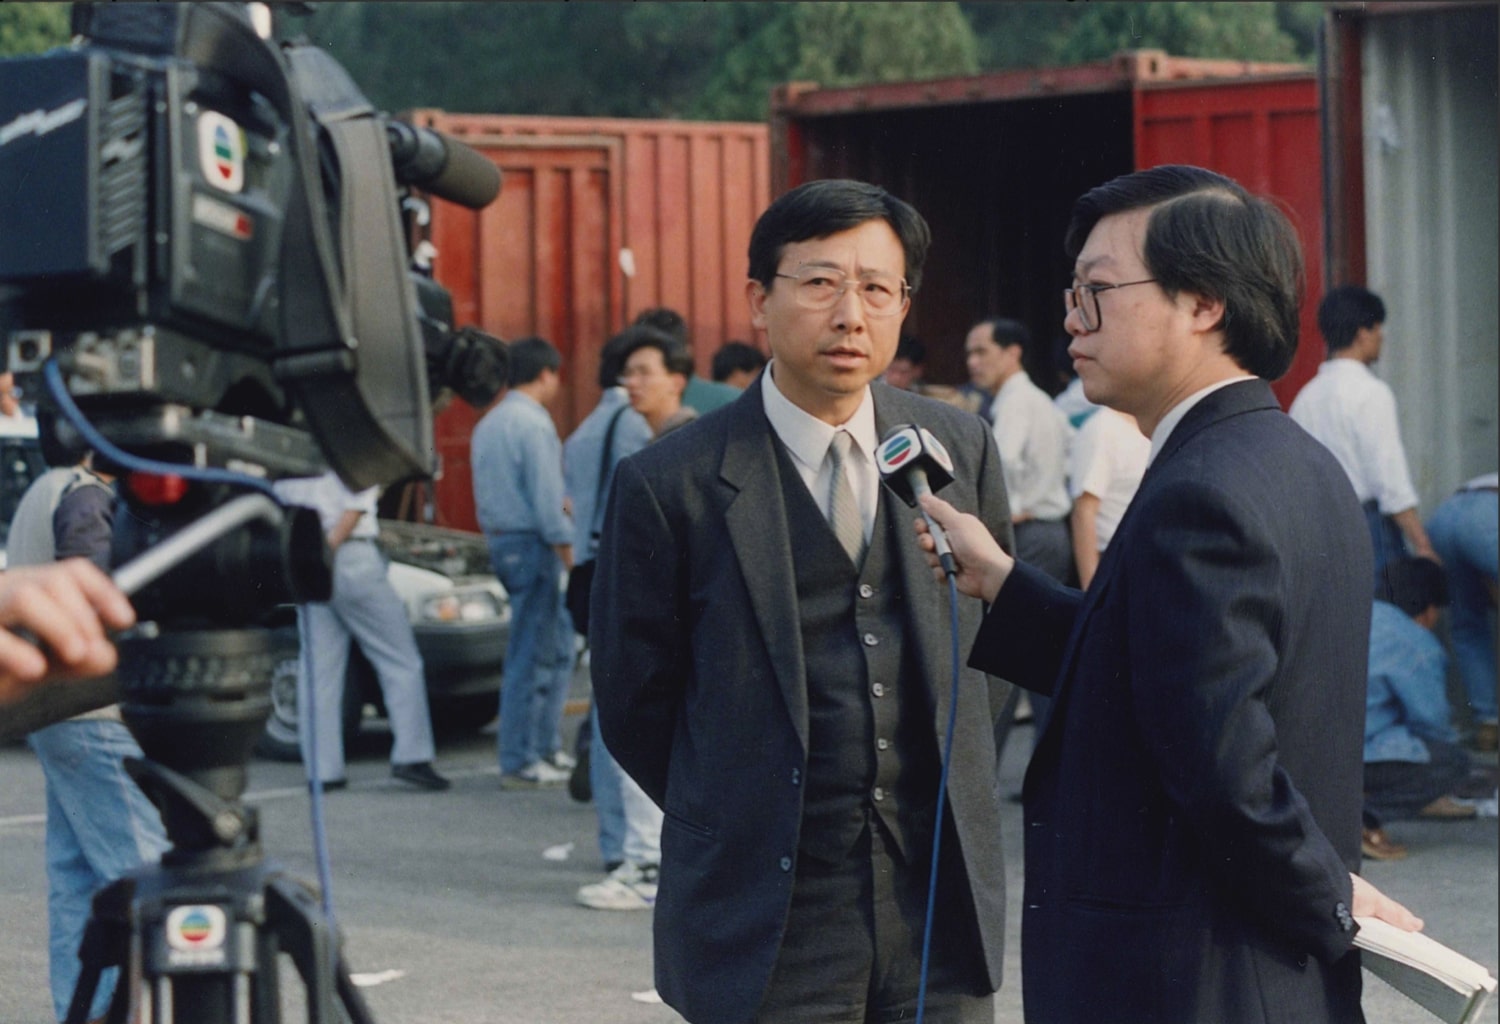 Tony Kwok interviewed by TVB at the scene of a car smuggling case